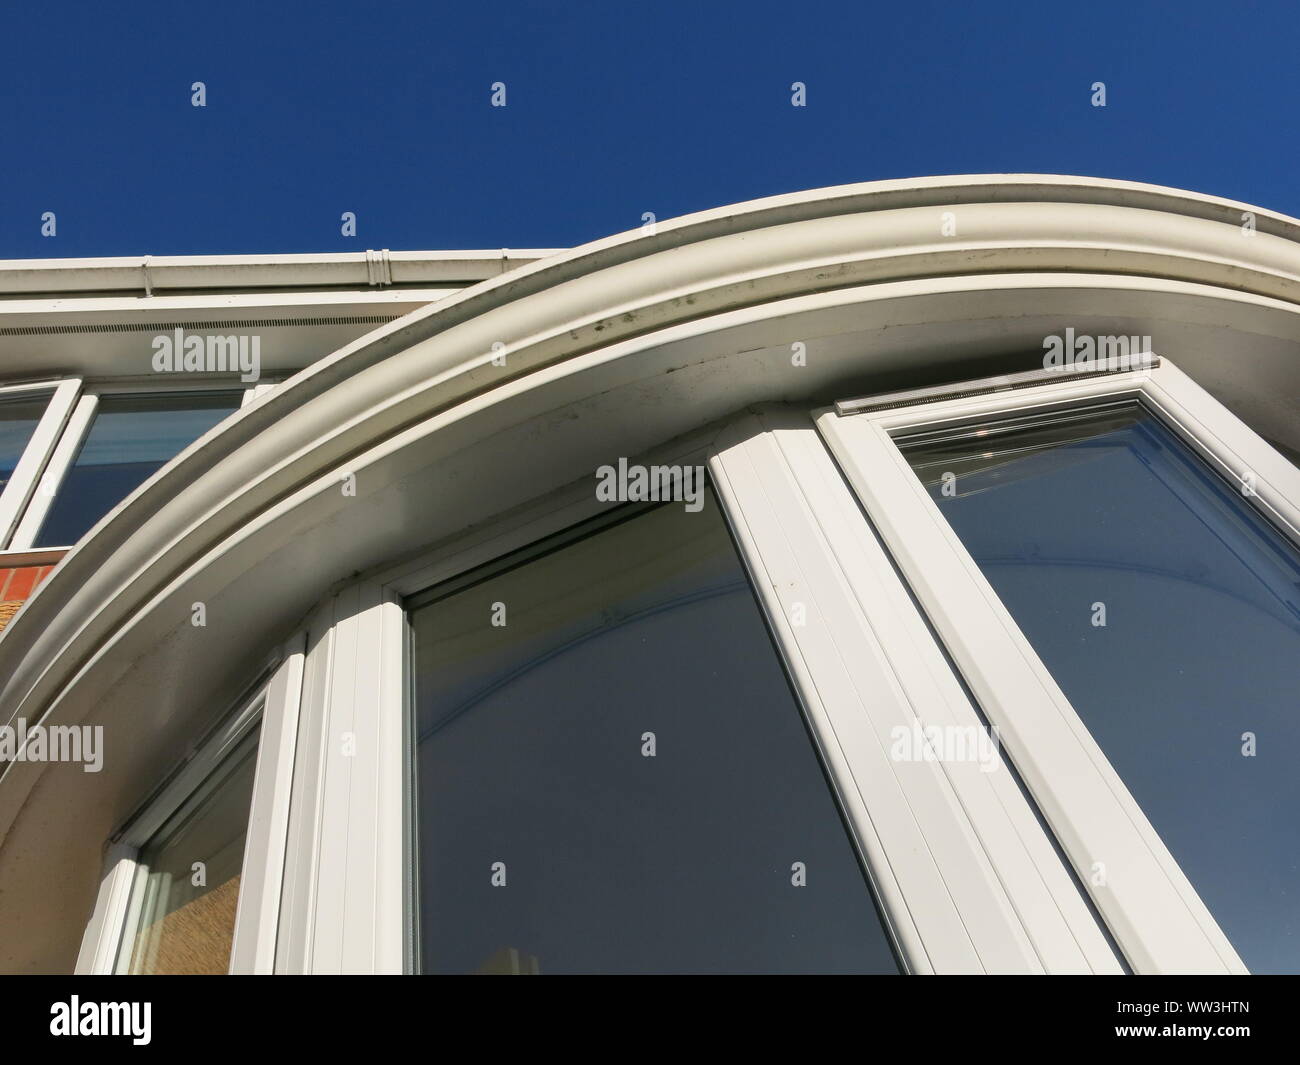 Modern house architecture with an abstract photo looking up at a curved bay window and straight roofline in white pvc, against a brilliant blue sky. Stock Photo